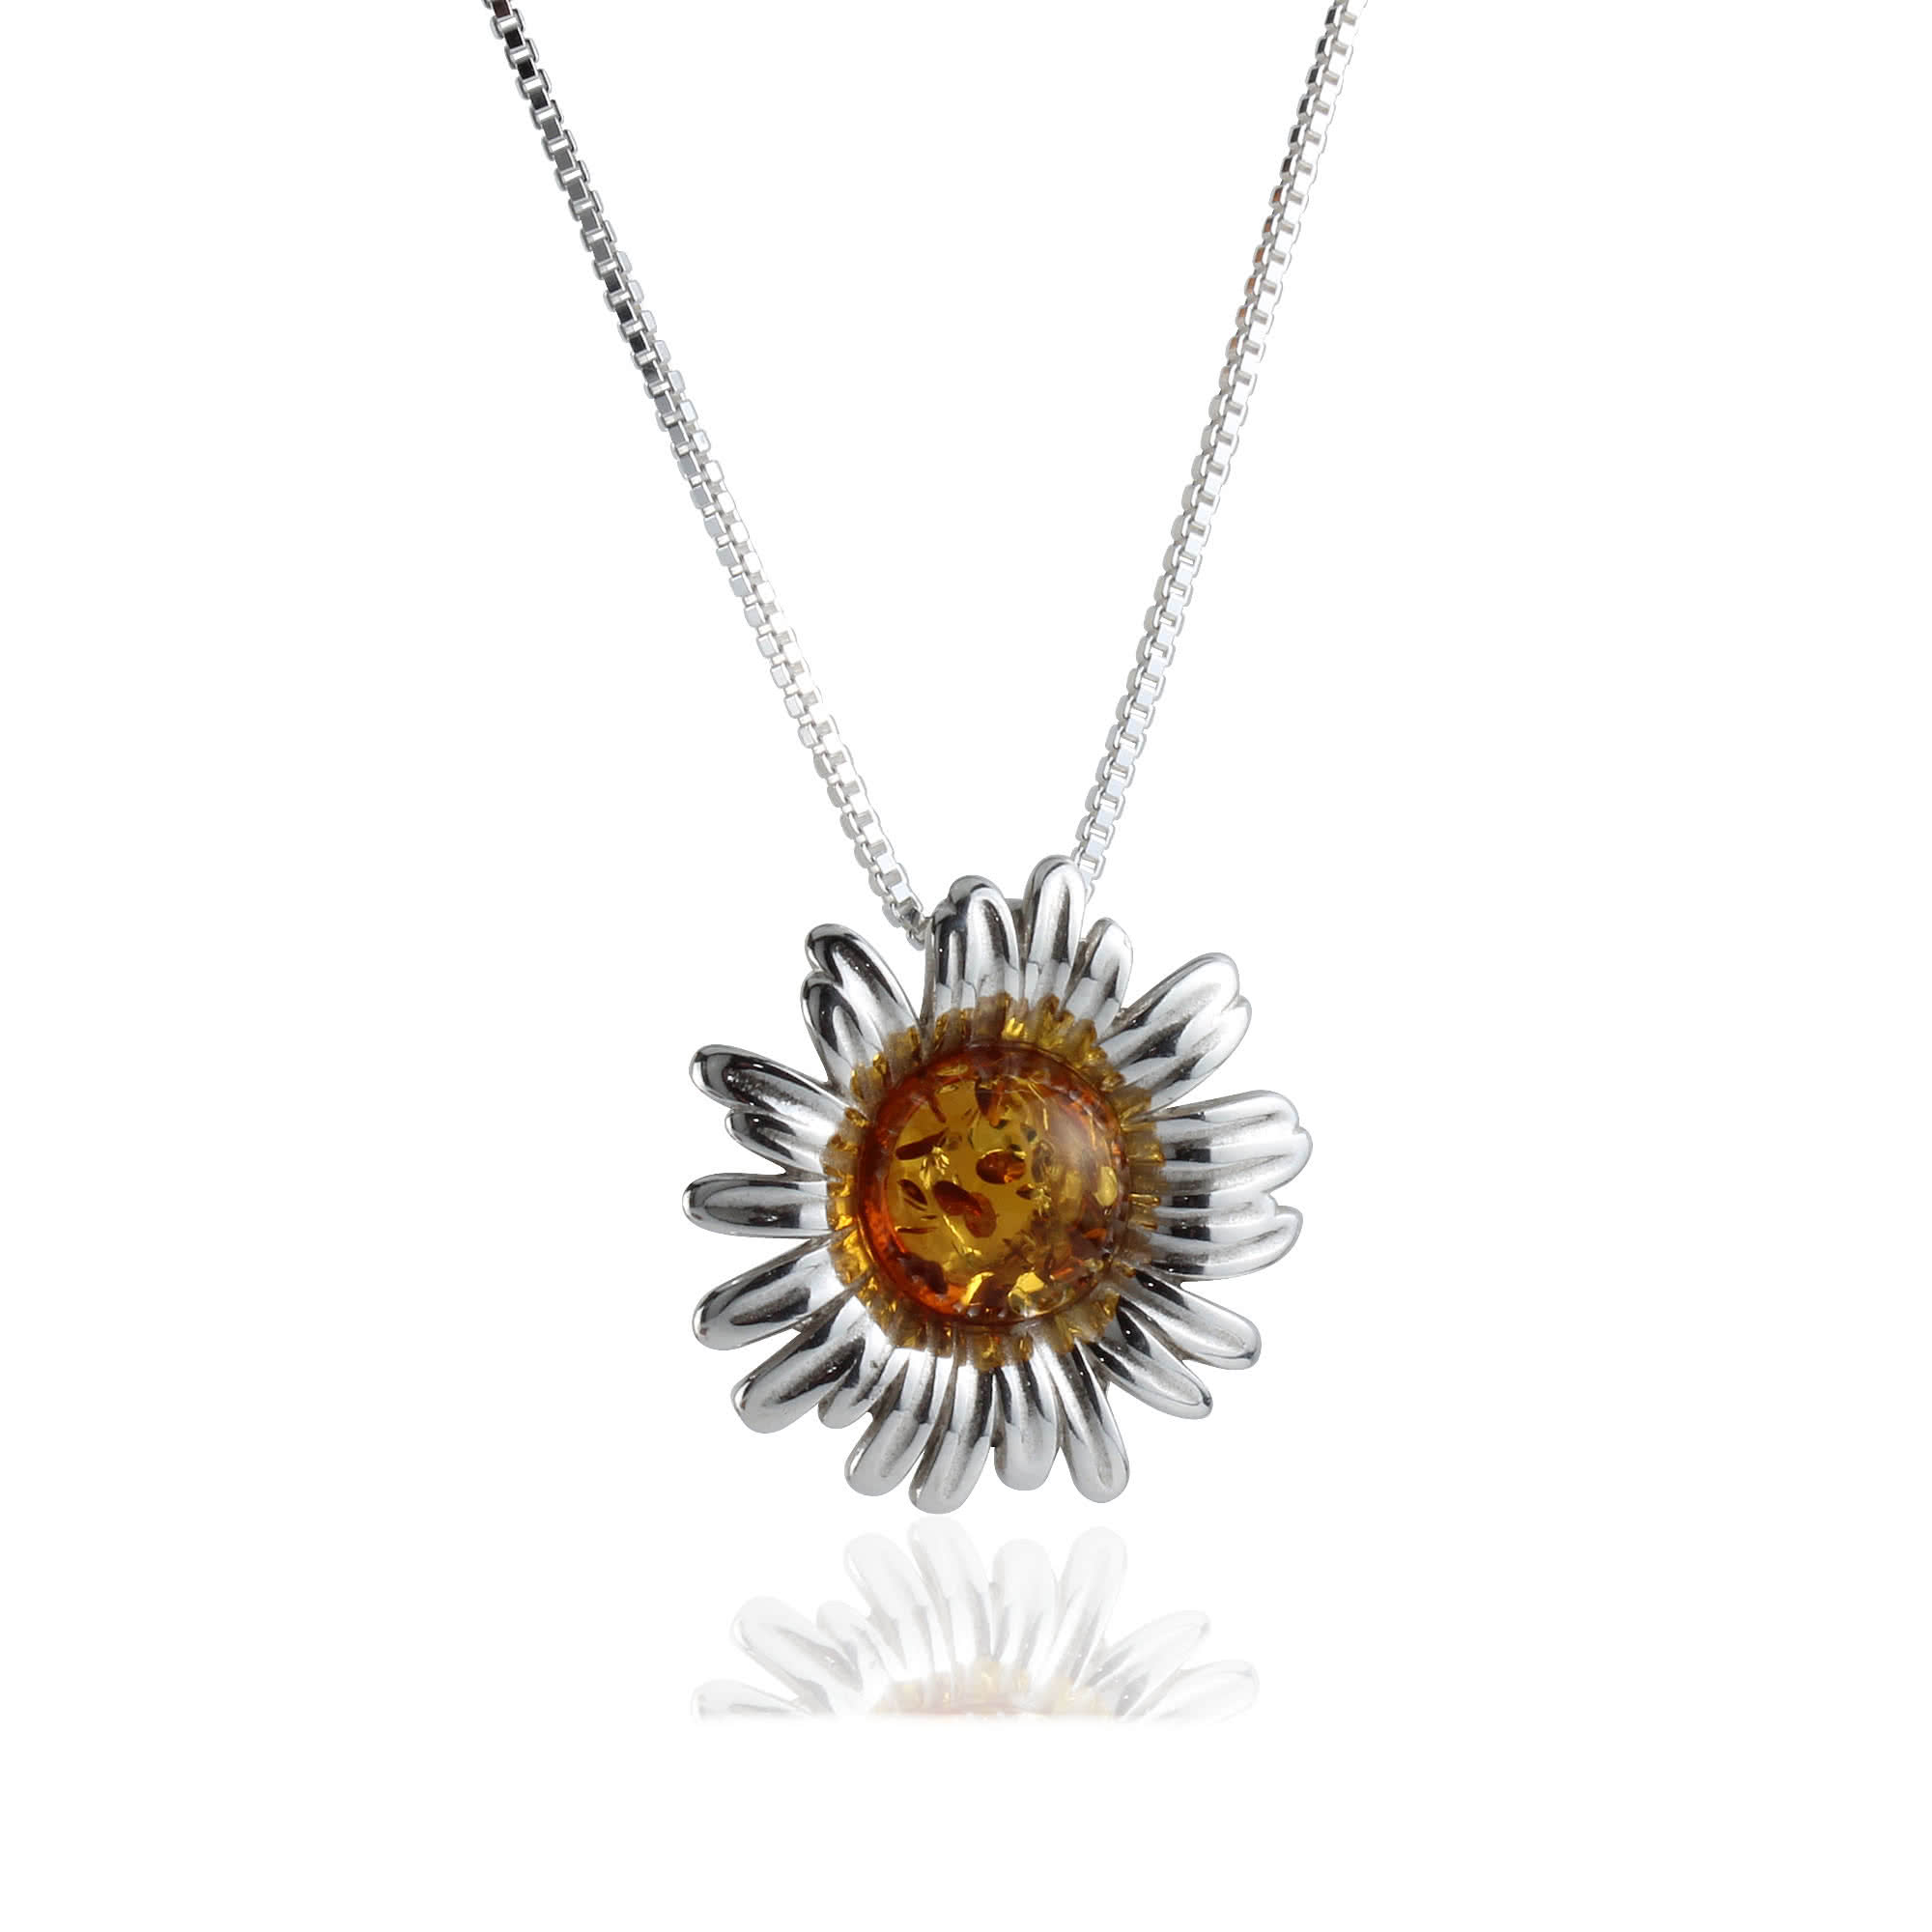 Amber Sterling Silver Sunflower Pendant Necklace Chain 18 Ian and Valeri Co